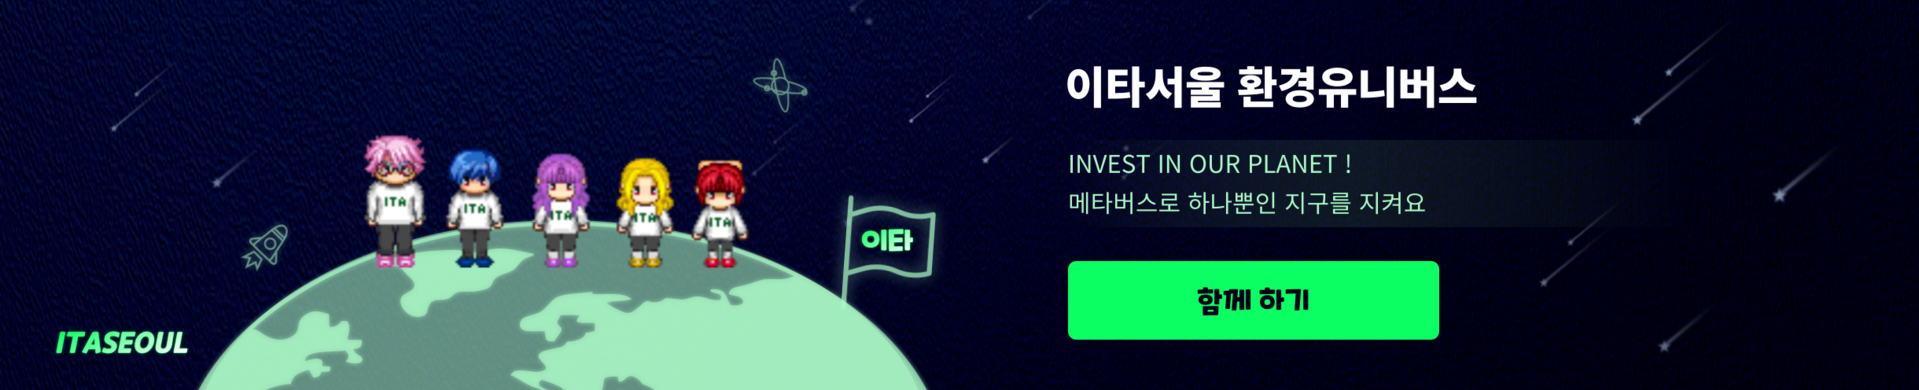 Invest In Our Planet - 지구에 투자하세요 